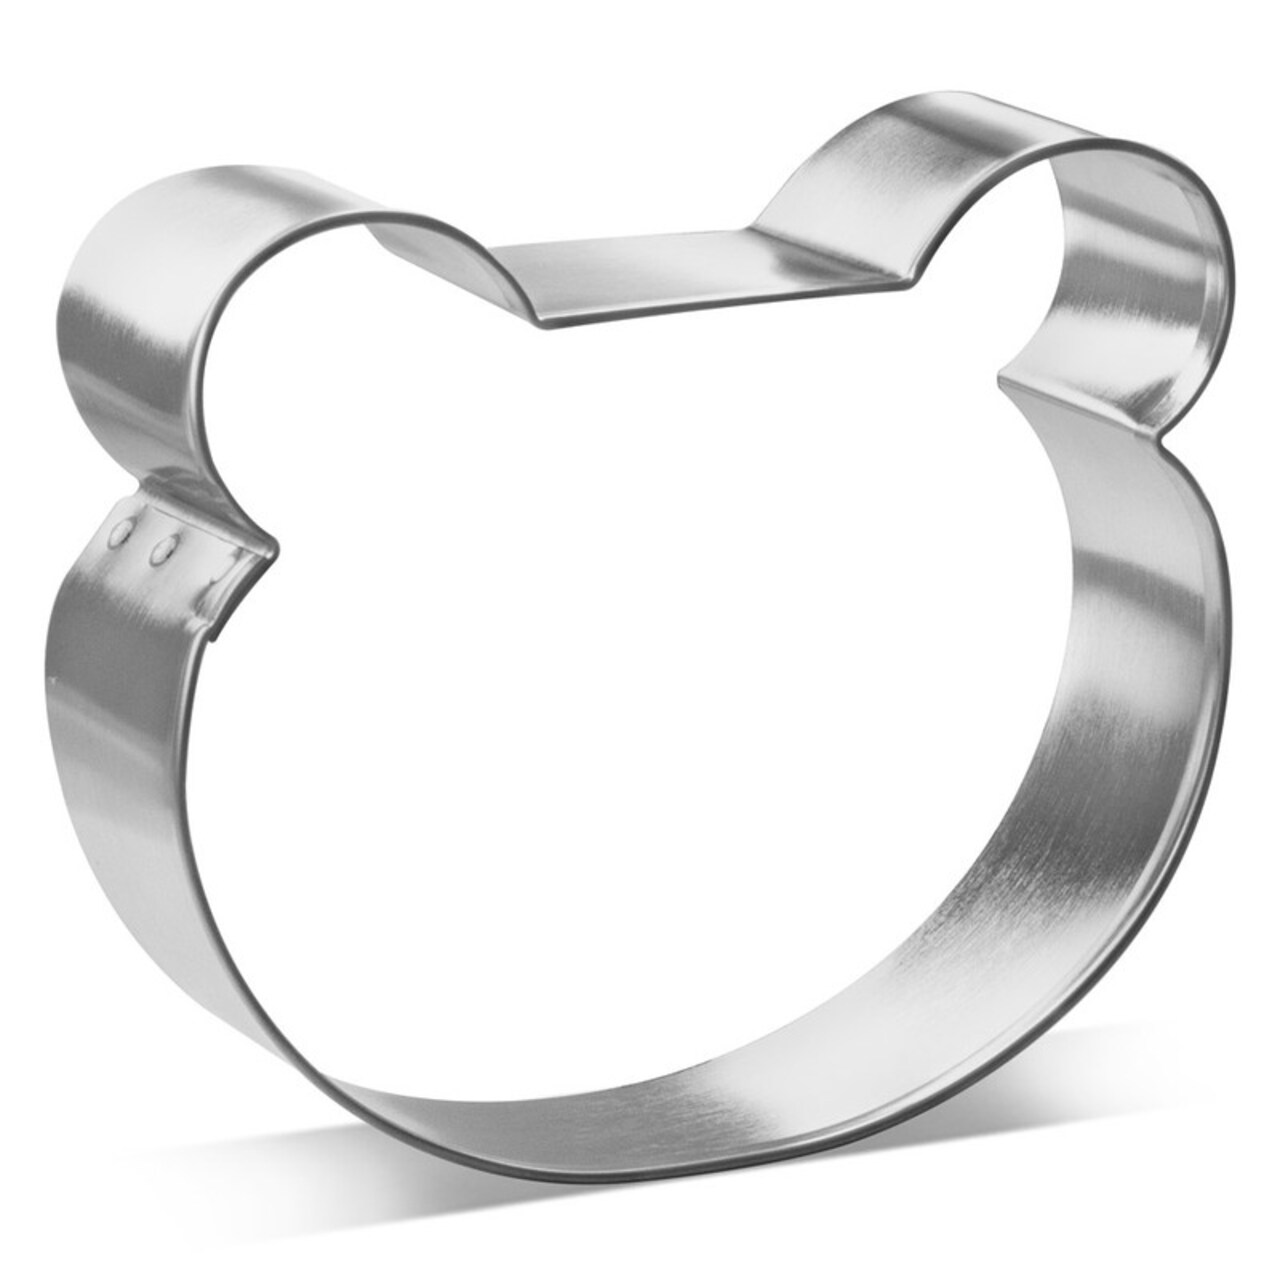 Bear Frog Face or Letter D Cookie Cutter 3.25 in, CookieCutter.com, Tin Plated Steel, Handmade in the USA